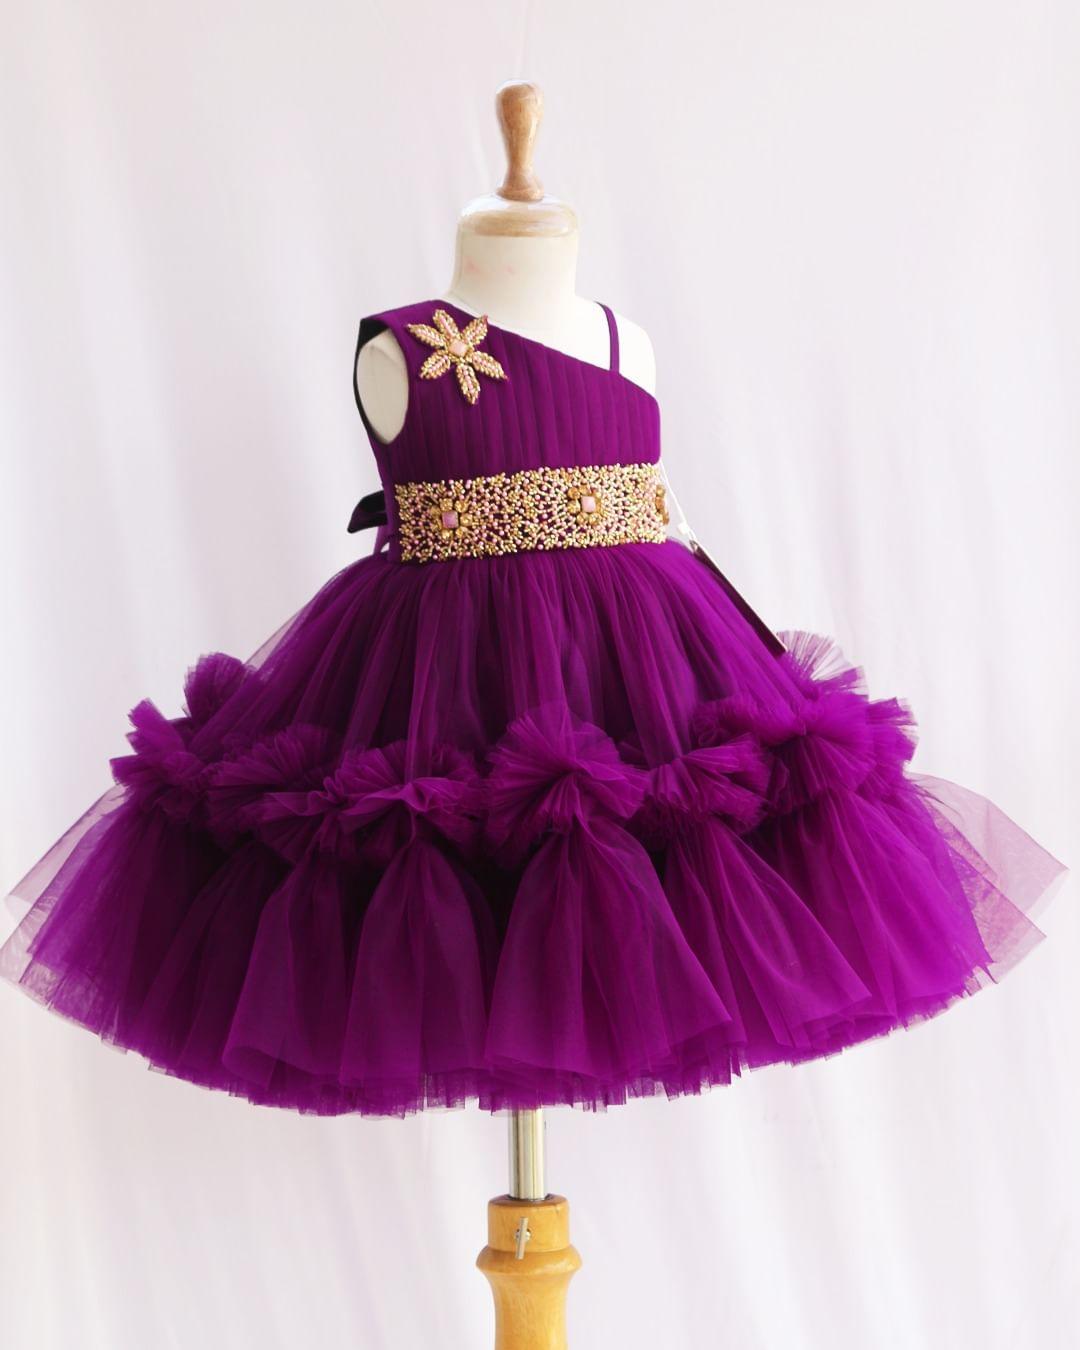 Purple Shade Pleated Ruffled Frock
Material: Purple Shade Pleated Ruffled Frock mono net with layered and ruffles on the end portion. Yoke portion is designed with pleated pattern and a handwork in t